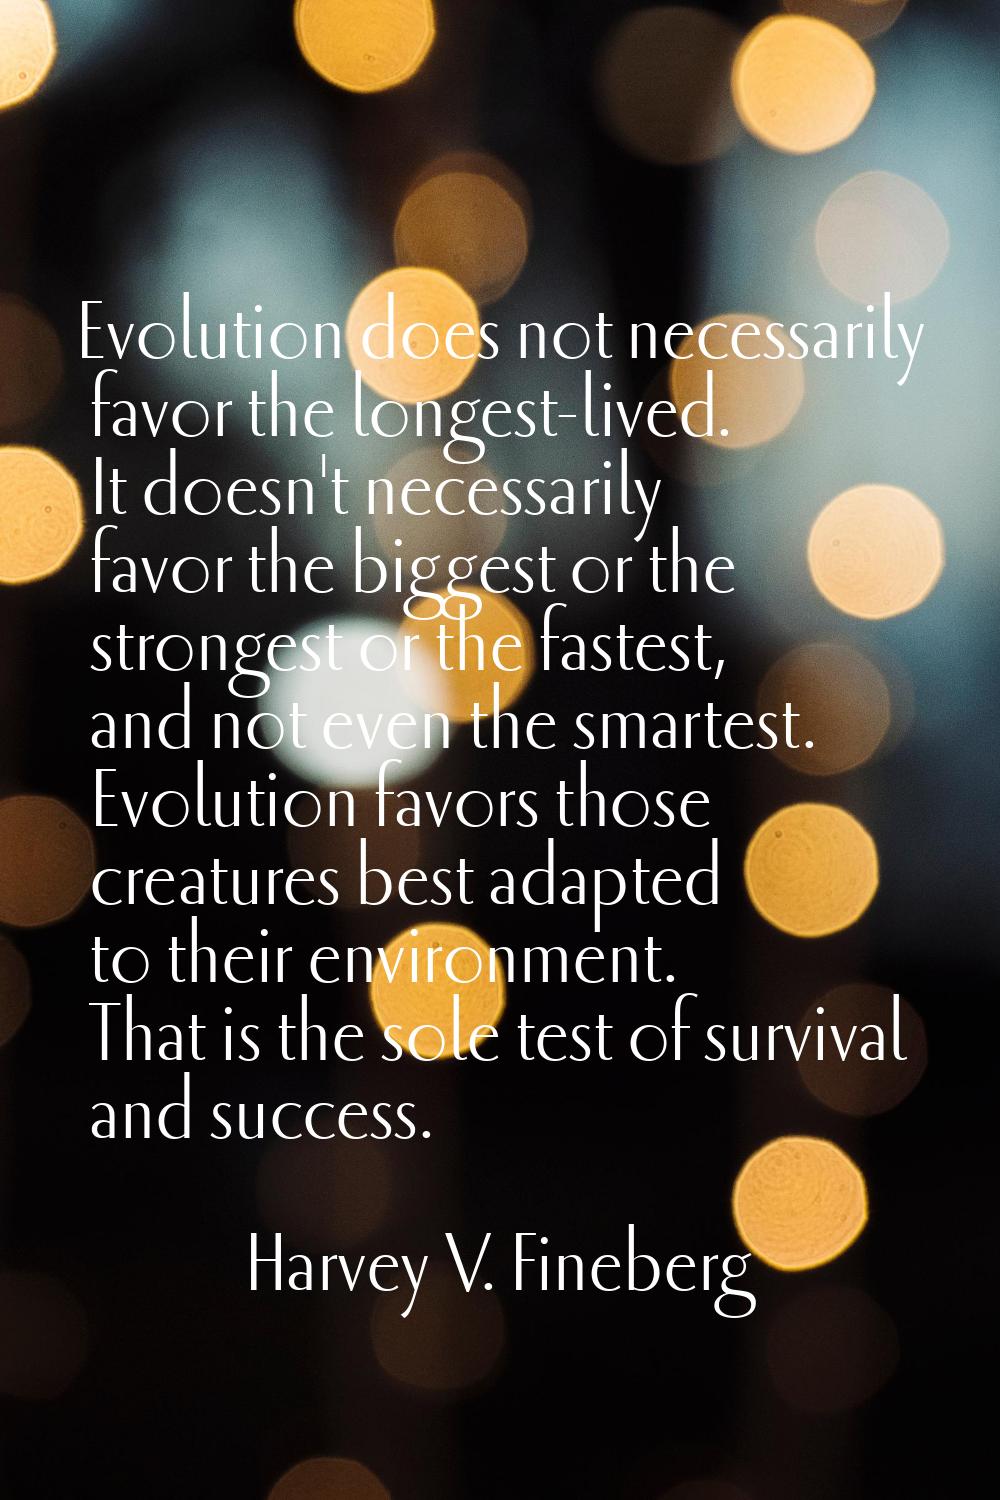 Evolution does not necessarily favor the longest-lived. It doesn't necessarily favor the biggest or